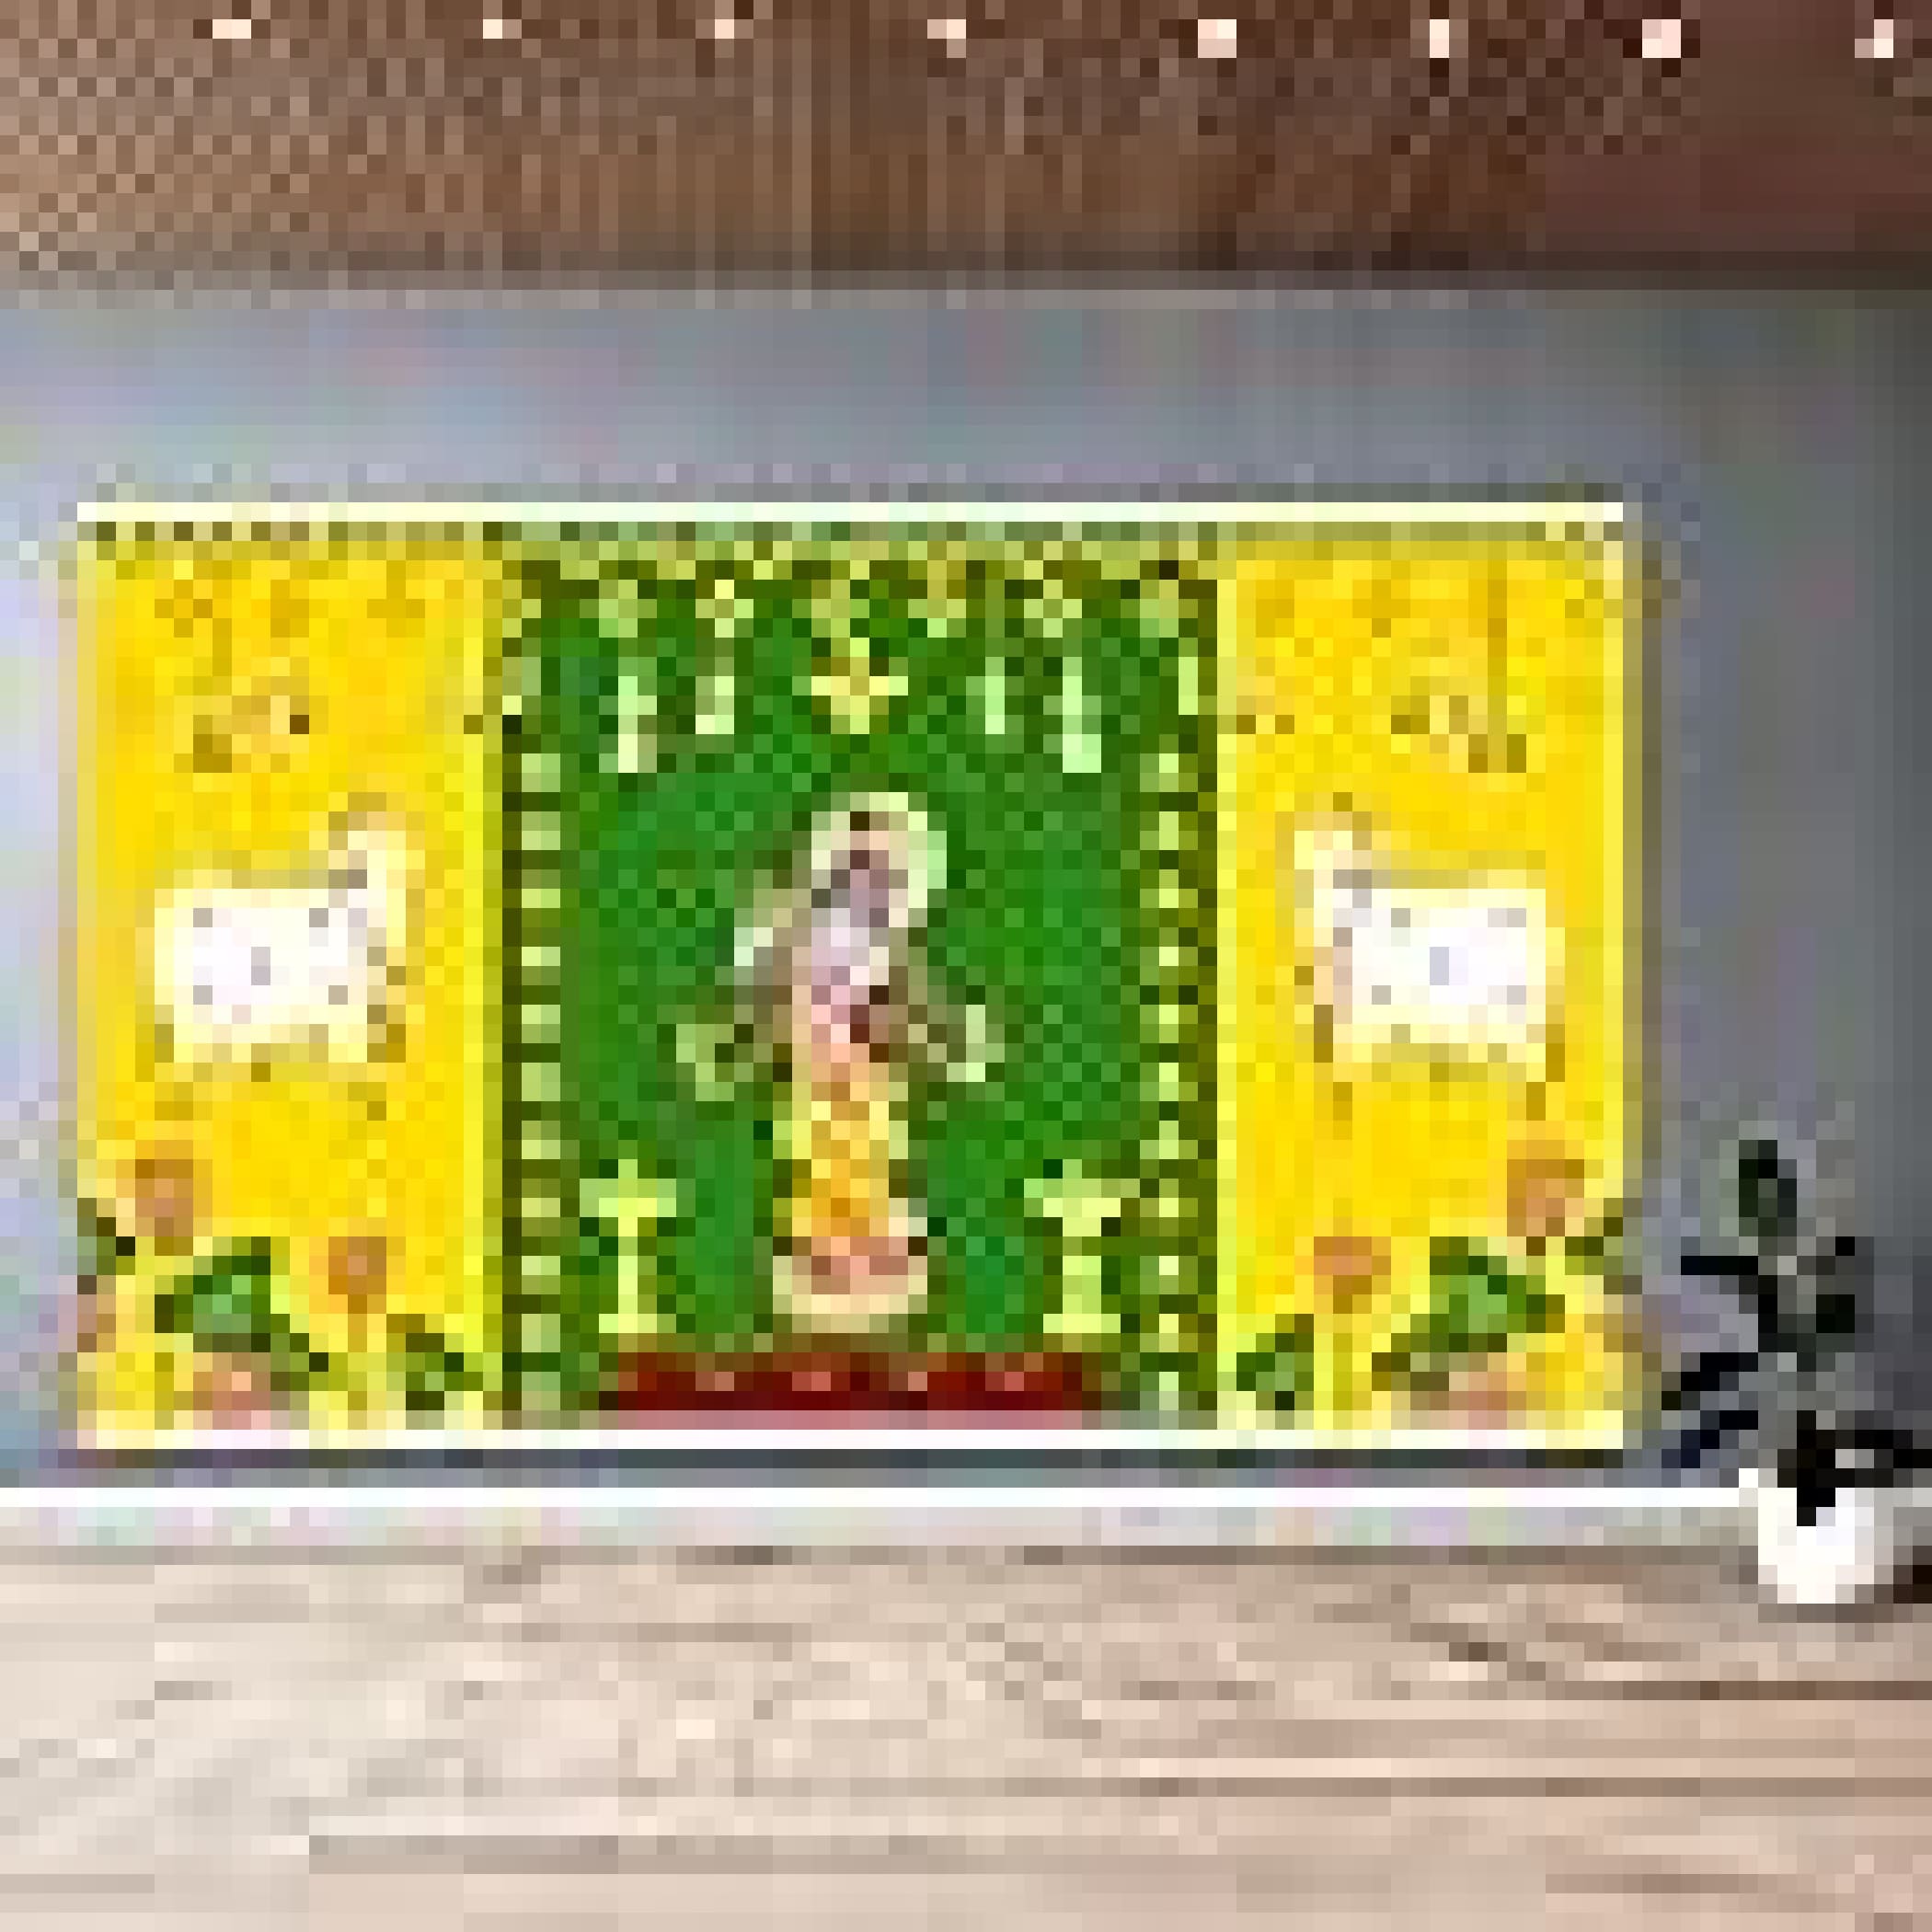 Krishna with cow backdrop indian traditional cloth 5x8 feet